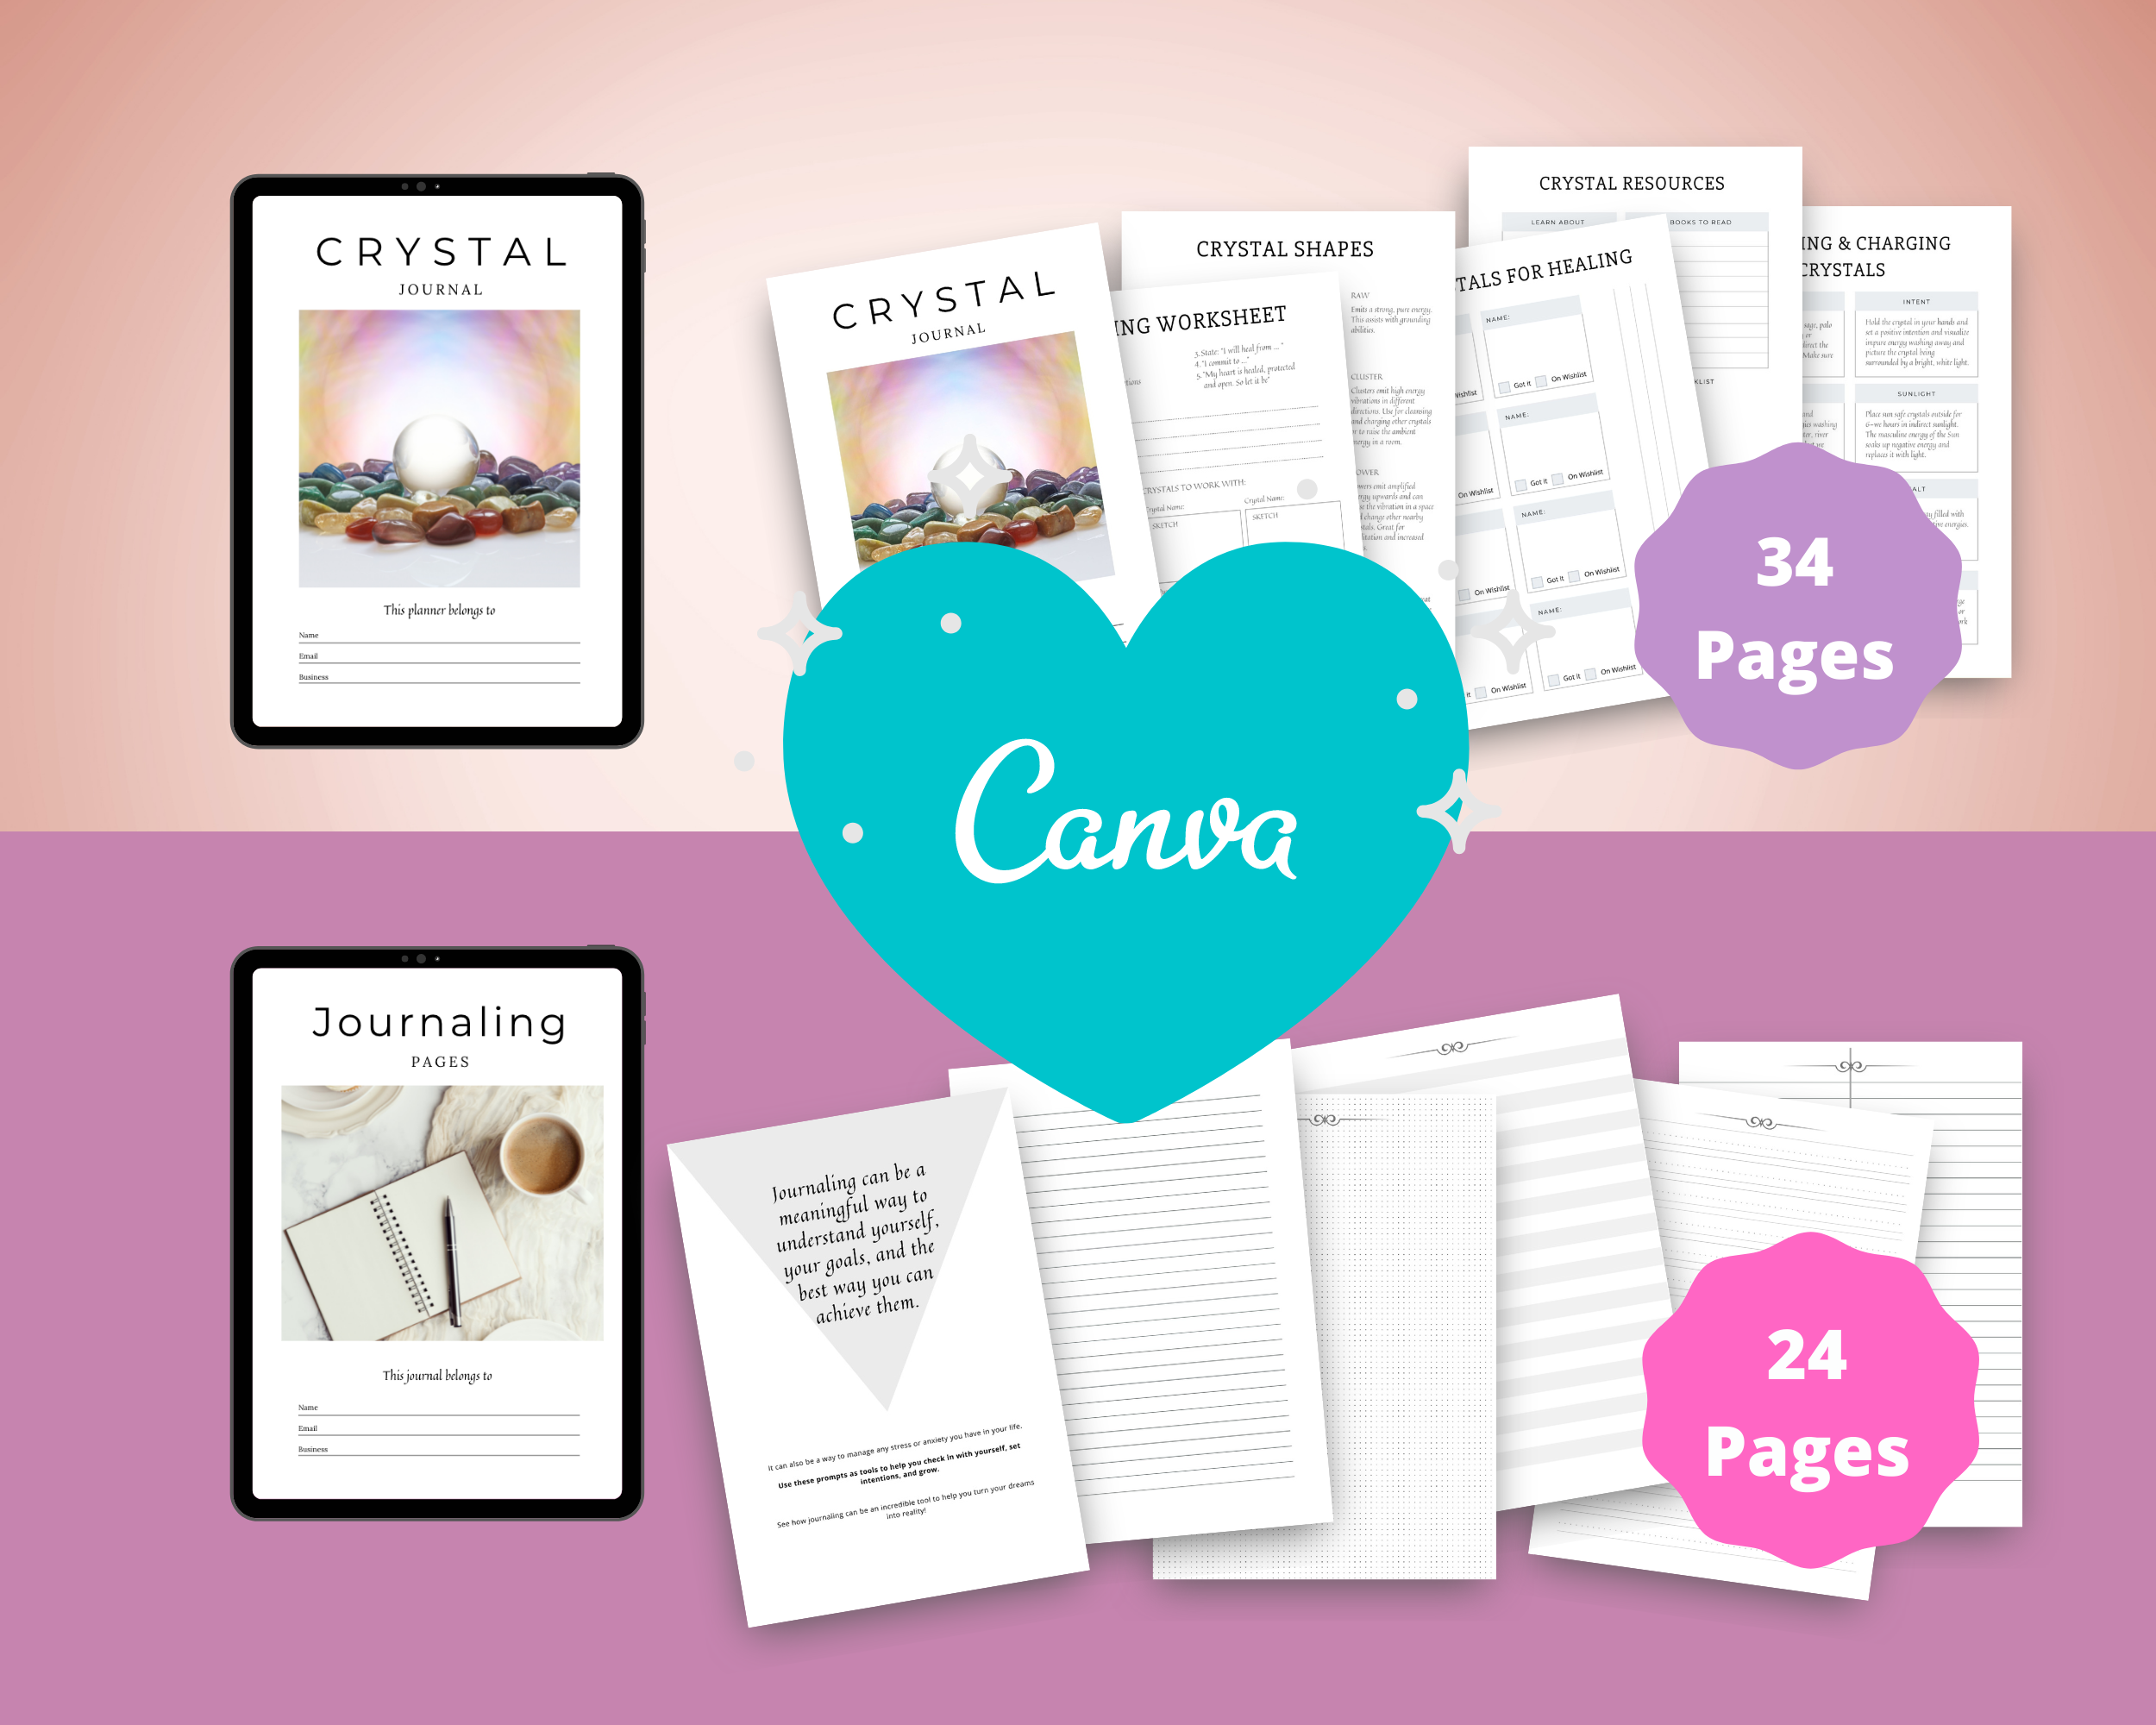 BUNDLE of 11 Spiritual Planners in Canva | Customizable | Editable | Commercial Use | Spiritual Templates